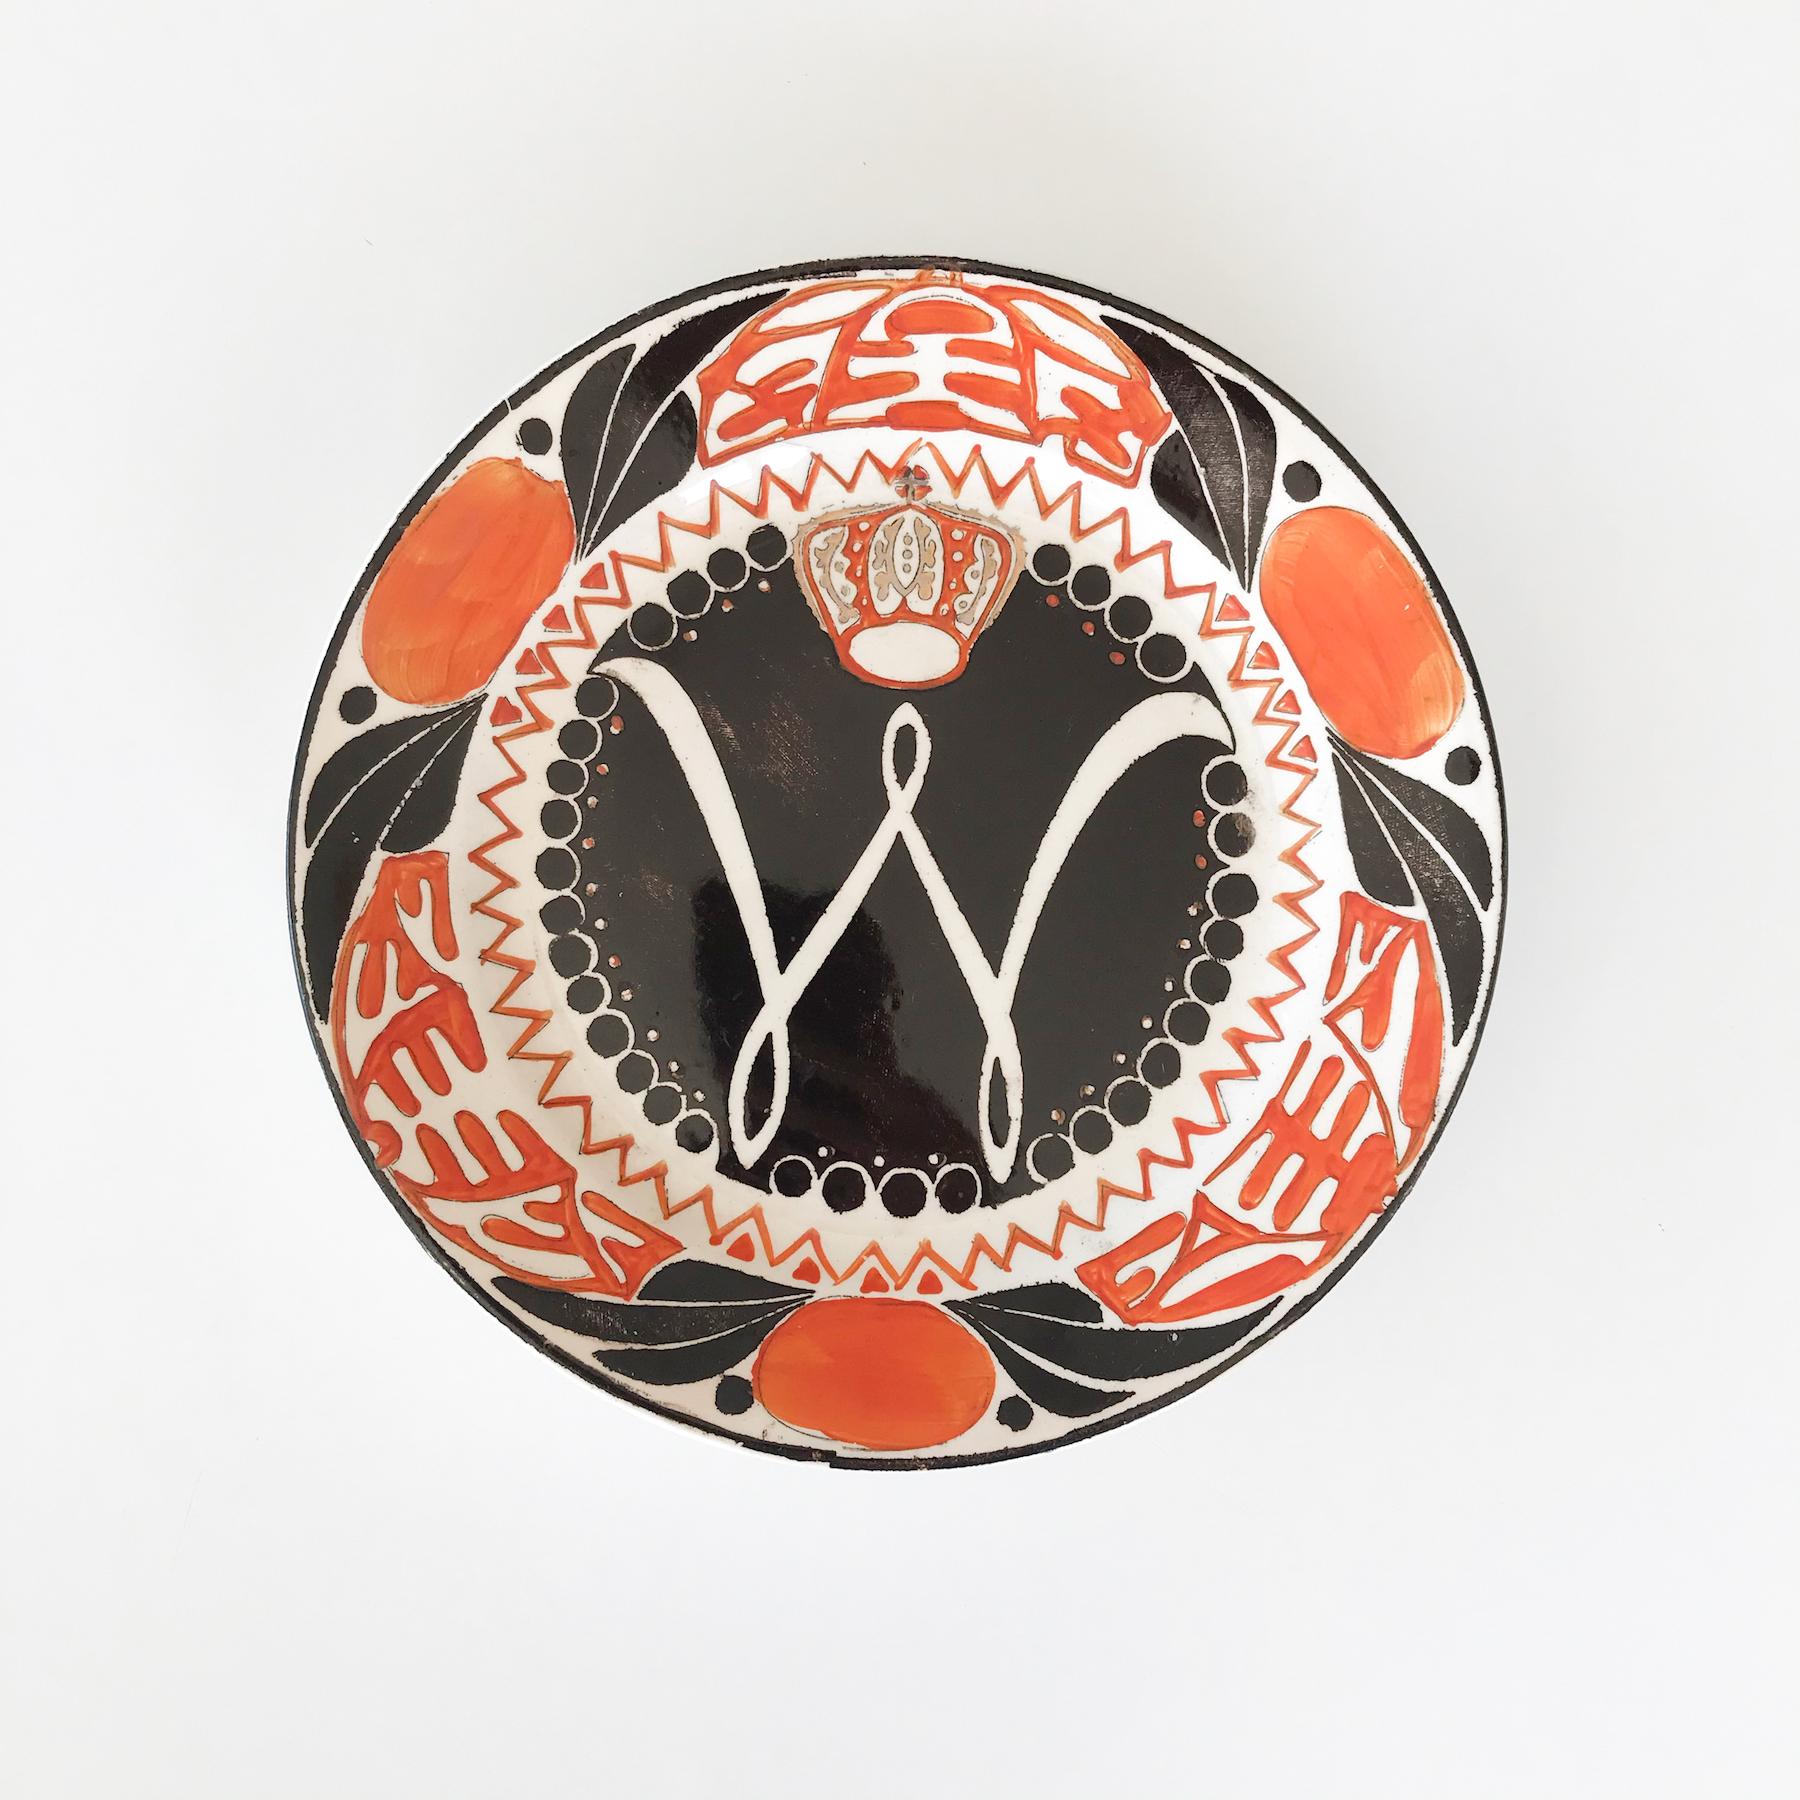 Wonderfully graphic wall plates with stencilled and hand painted design in orange, black and gold commemorating the coronation of Queen Wilhelmina of the Netherlands in 1898.

Great wall decor item for either domestic or hospitality use. It would